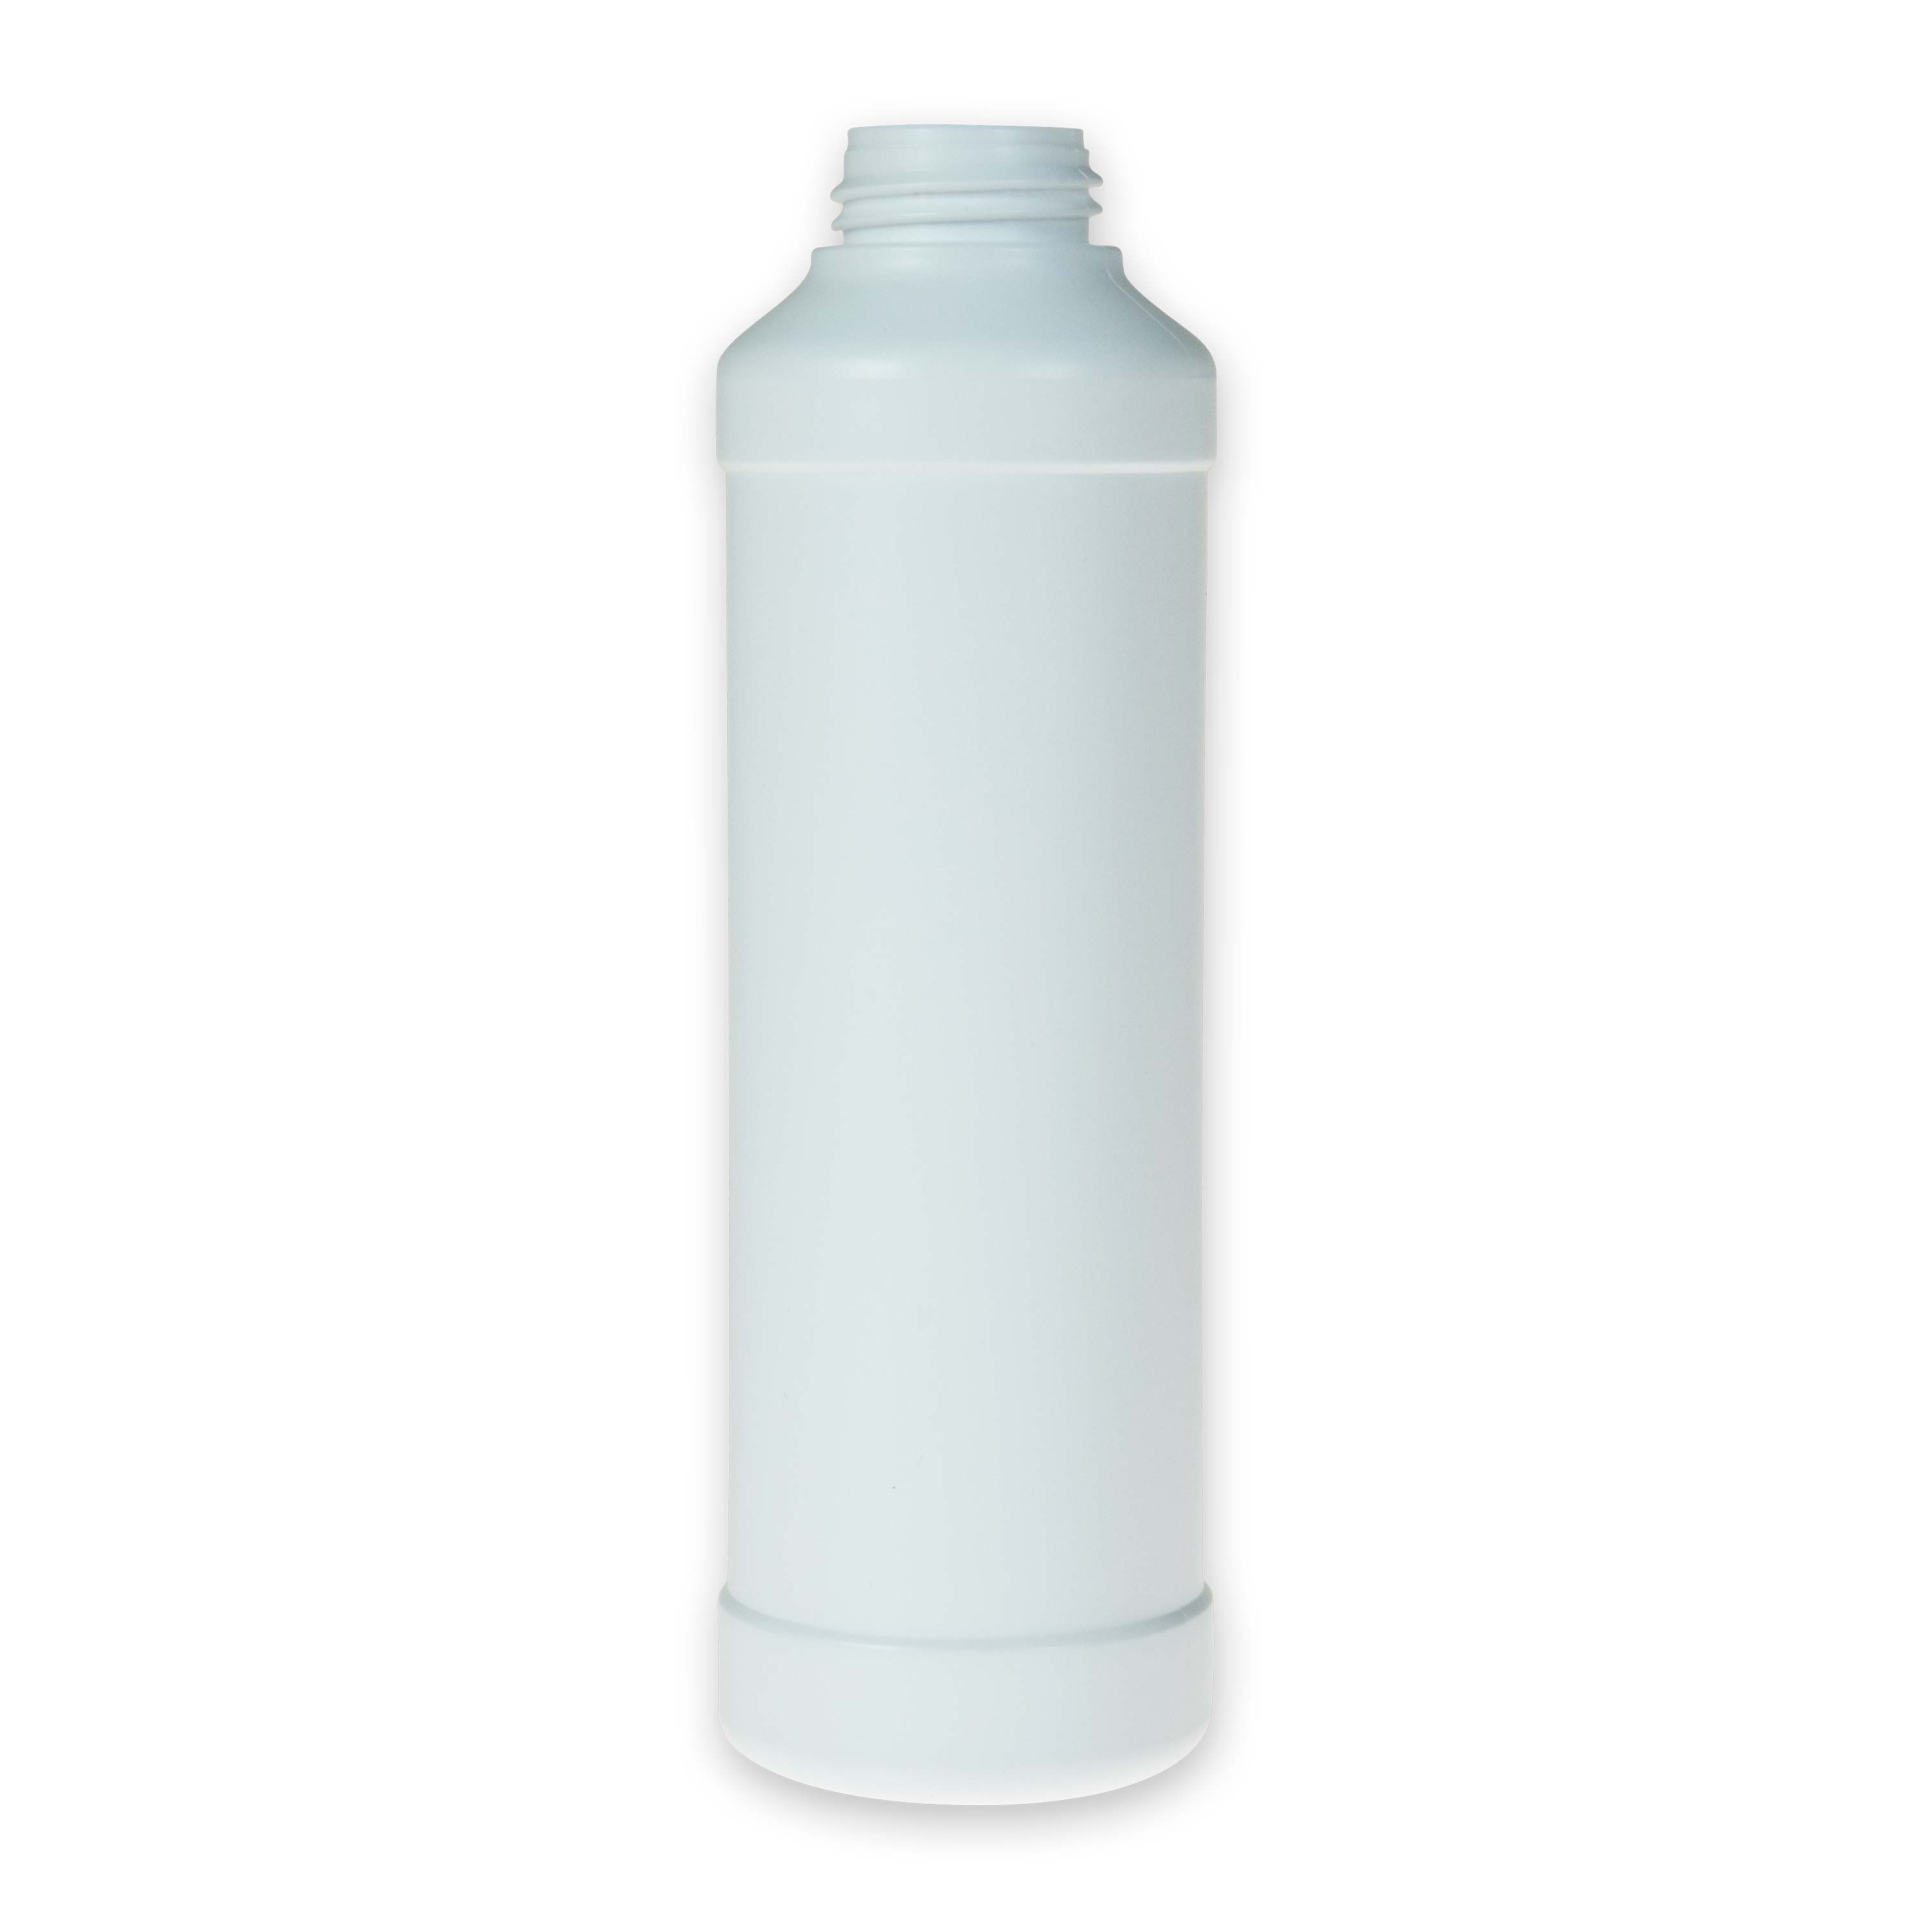 Cylindrical round bottle made of HDPE white 250 ml